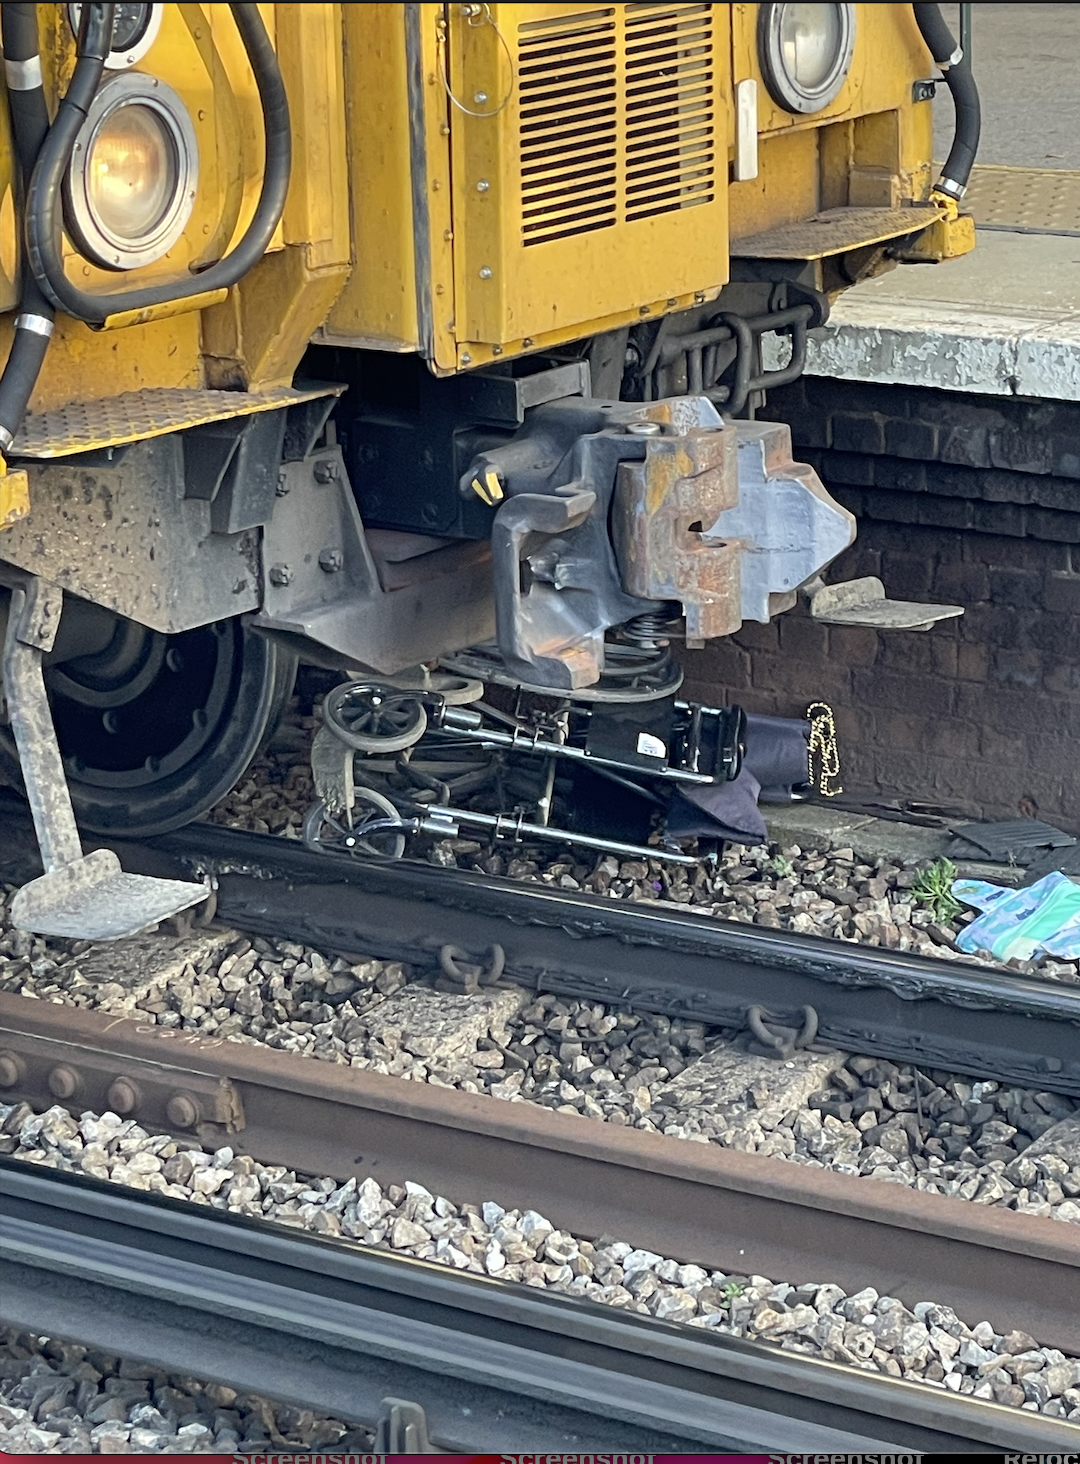 Wheelchair trapped under the South west train at Battersea Park station